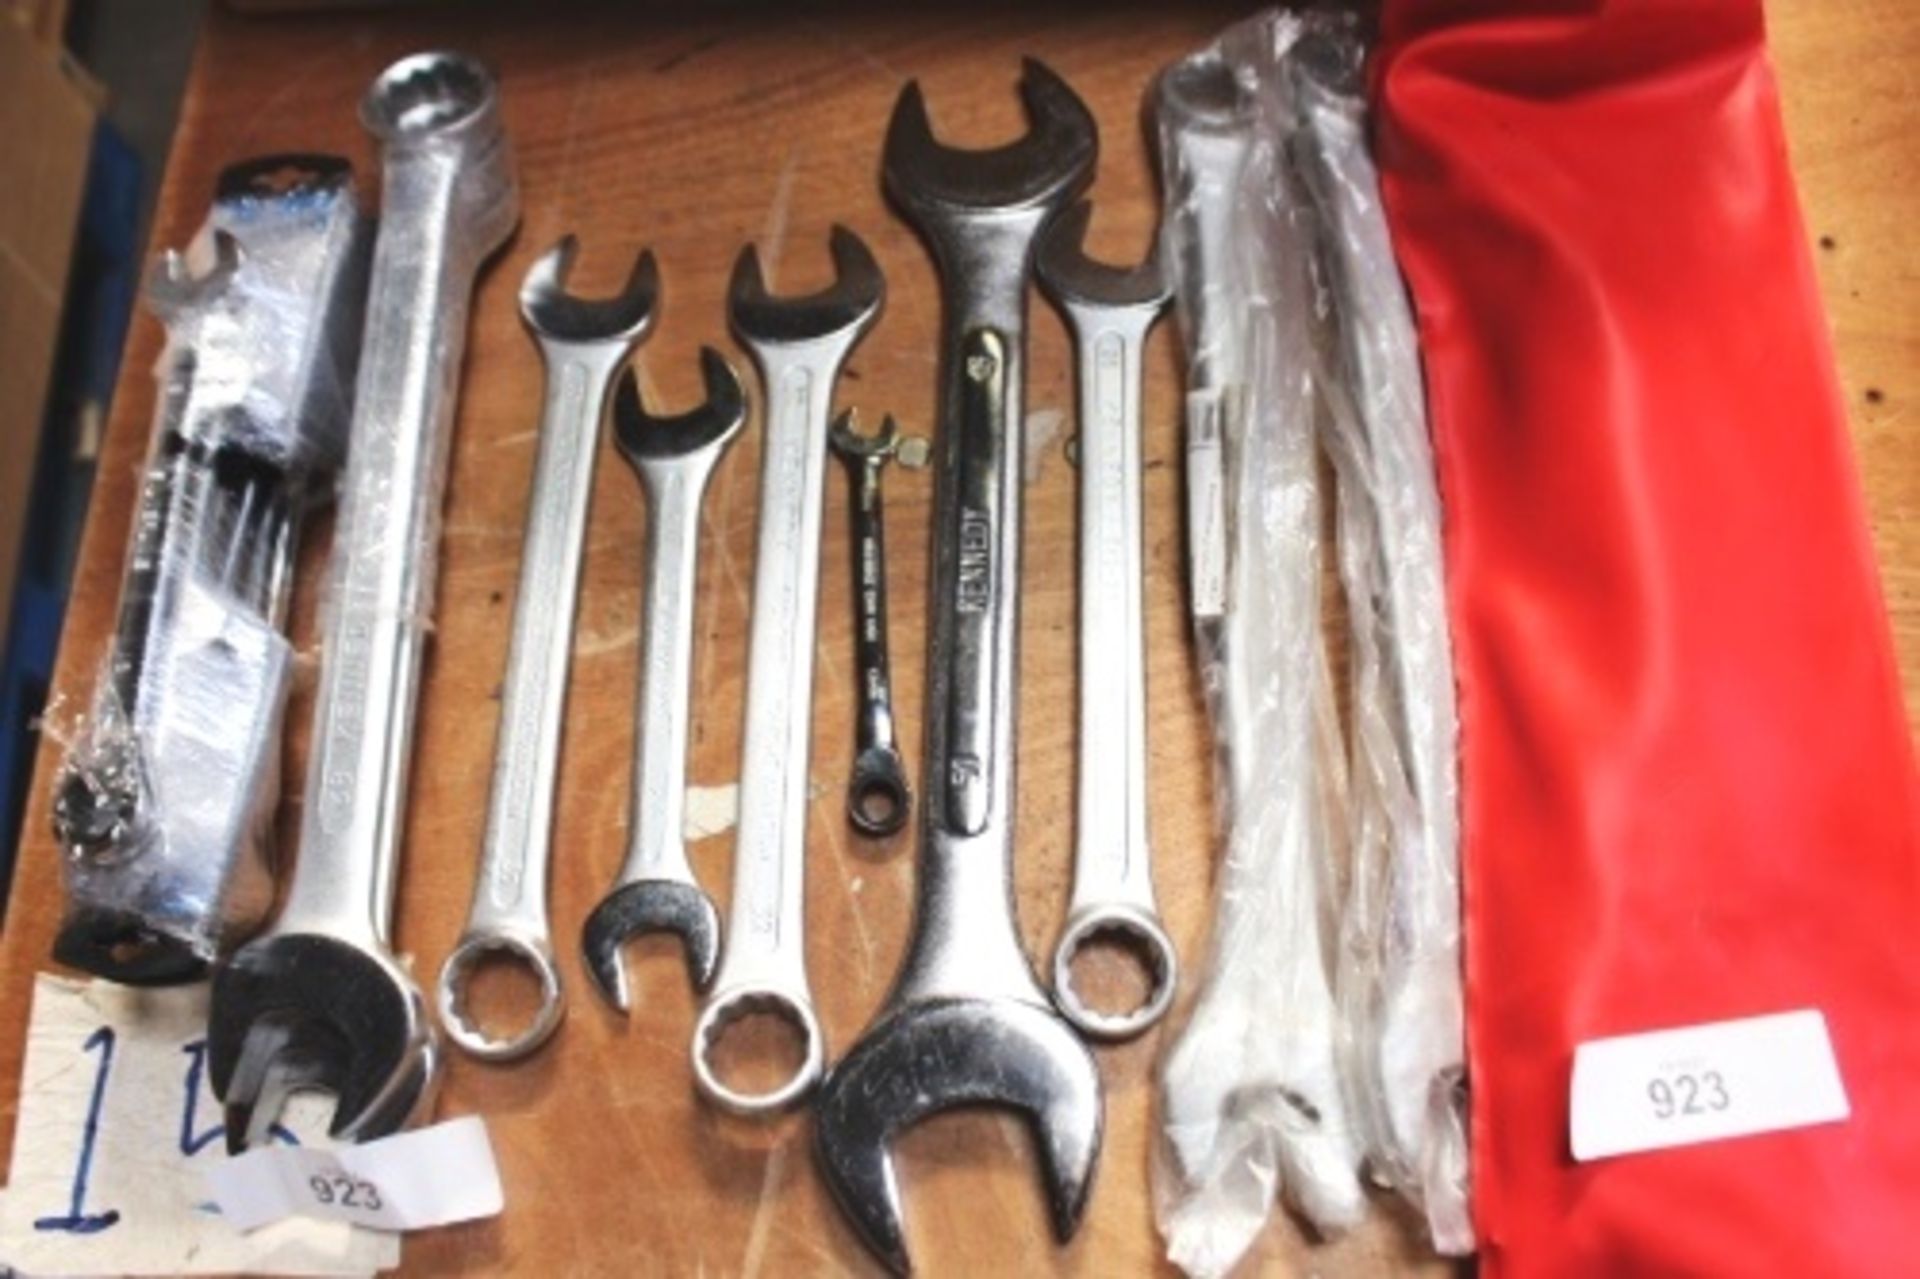 10 x assorted large metric combination spanners and 5 x similar - Grade B (SW9)